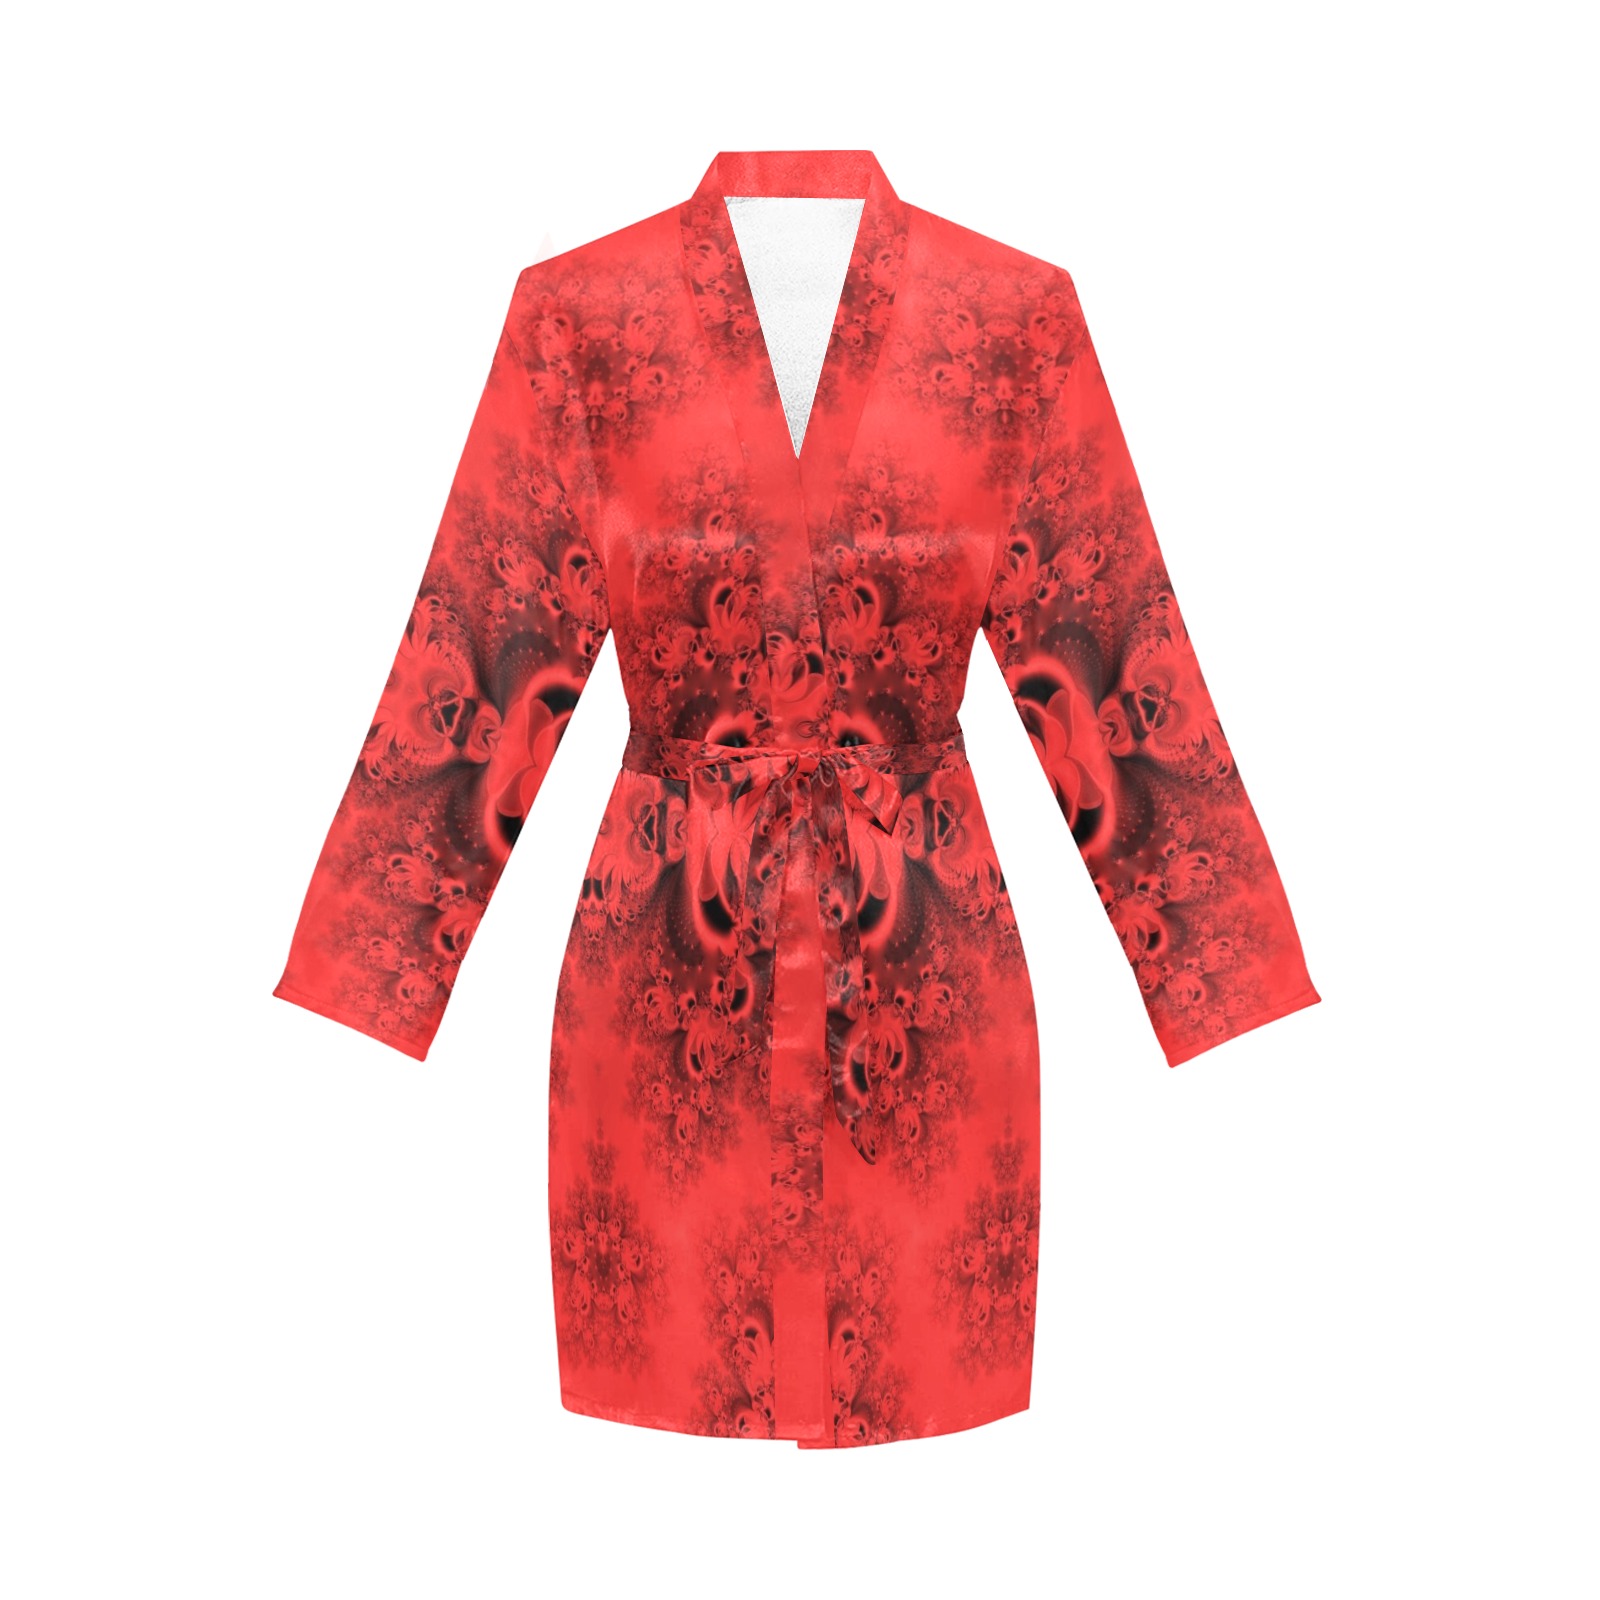 Autumn Reds in the Garden Frost Fractal Women's Long Sleeve Belted Night Robe